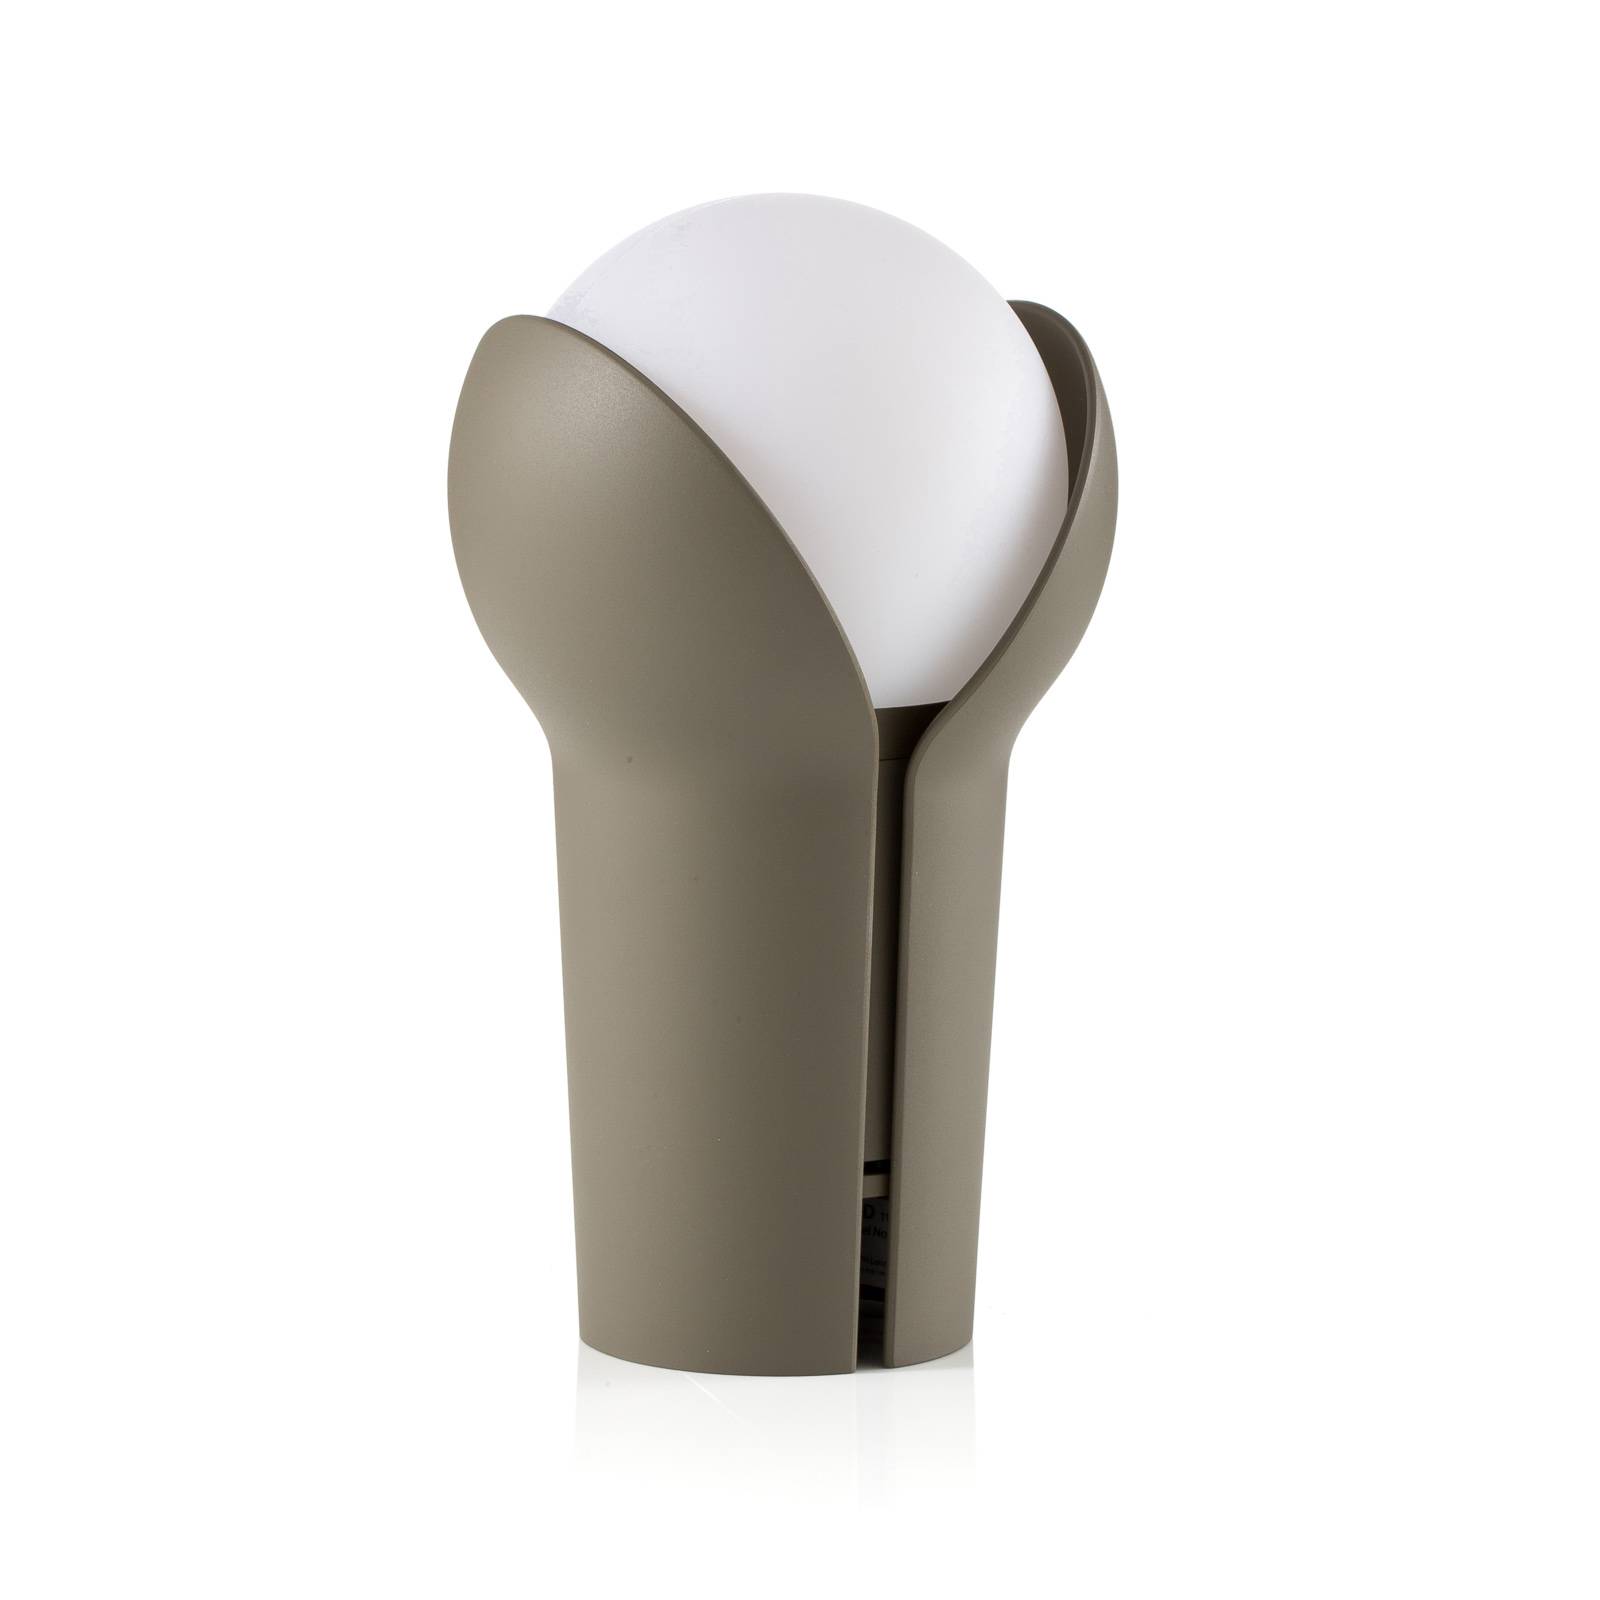 Image of Innermost Bud lampe à poser LED, portable, Olive 